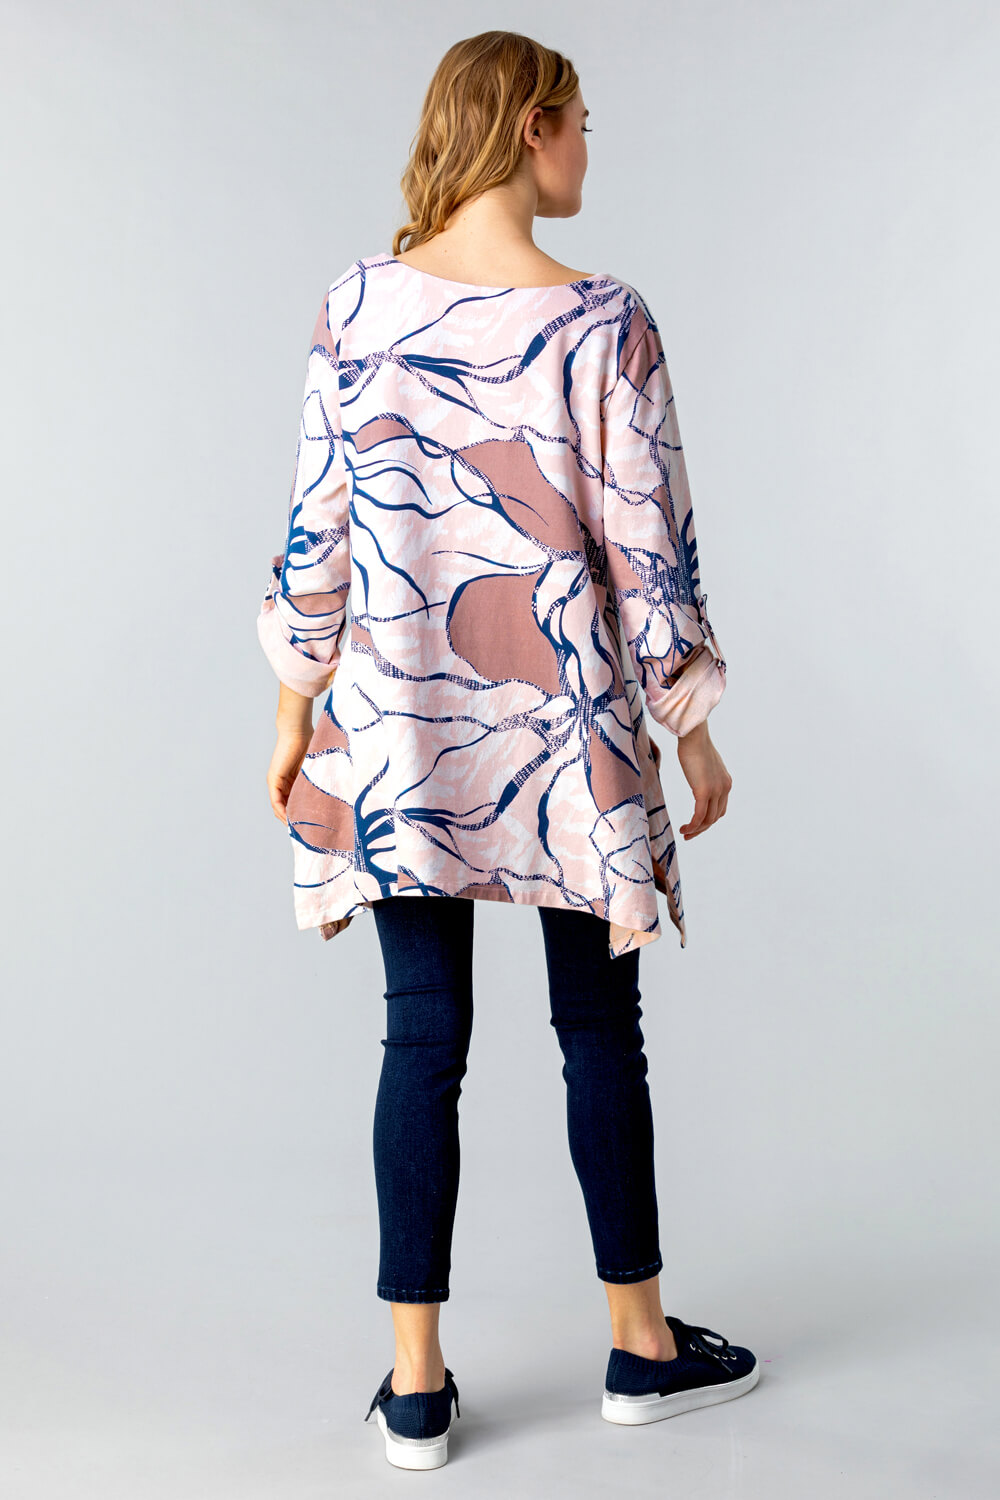 PINK Abstract Print Tunic Top with Pockets, Image 2 of 4